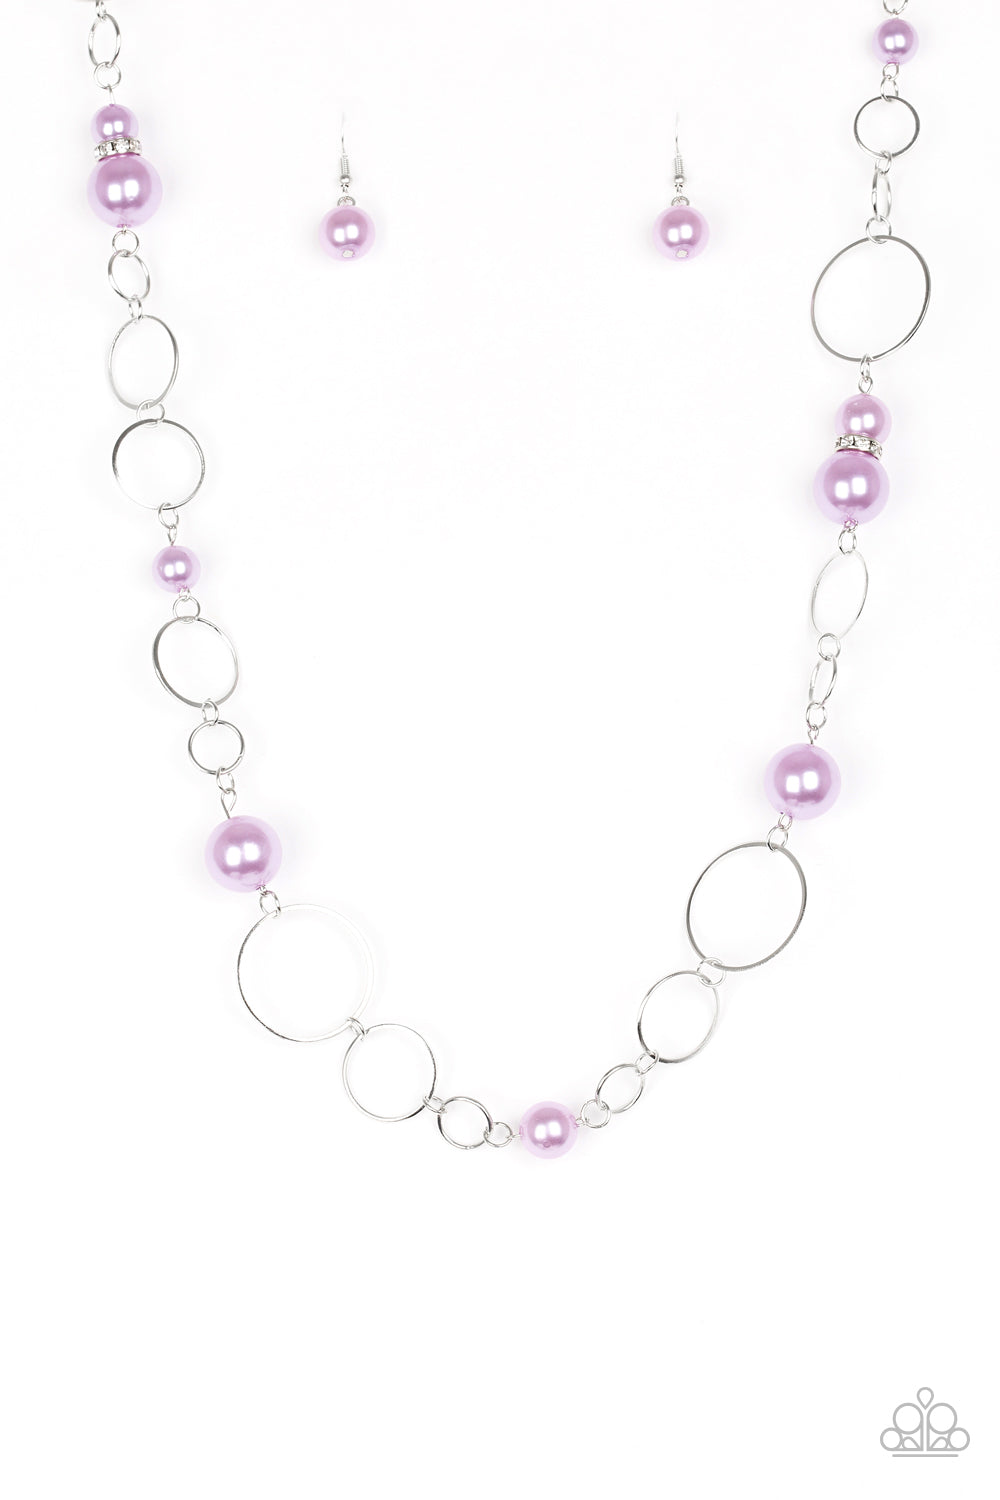 Lovely Lady Luck - Purple necklace